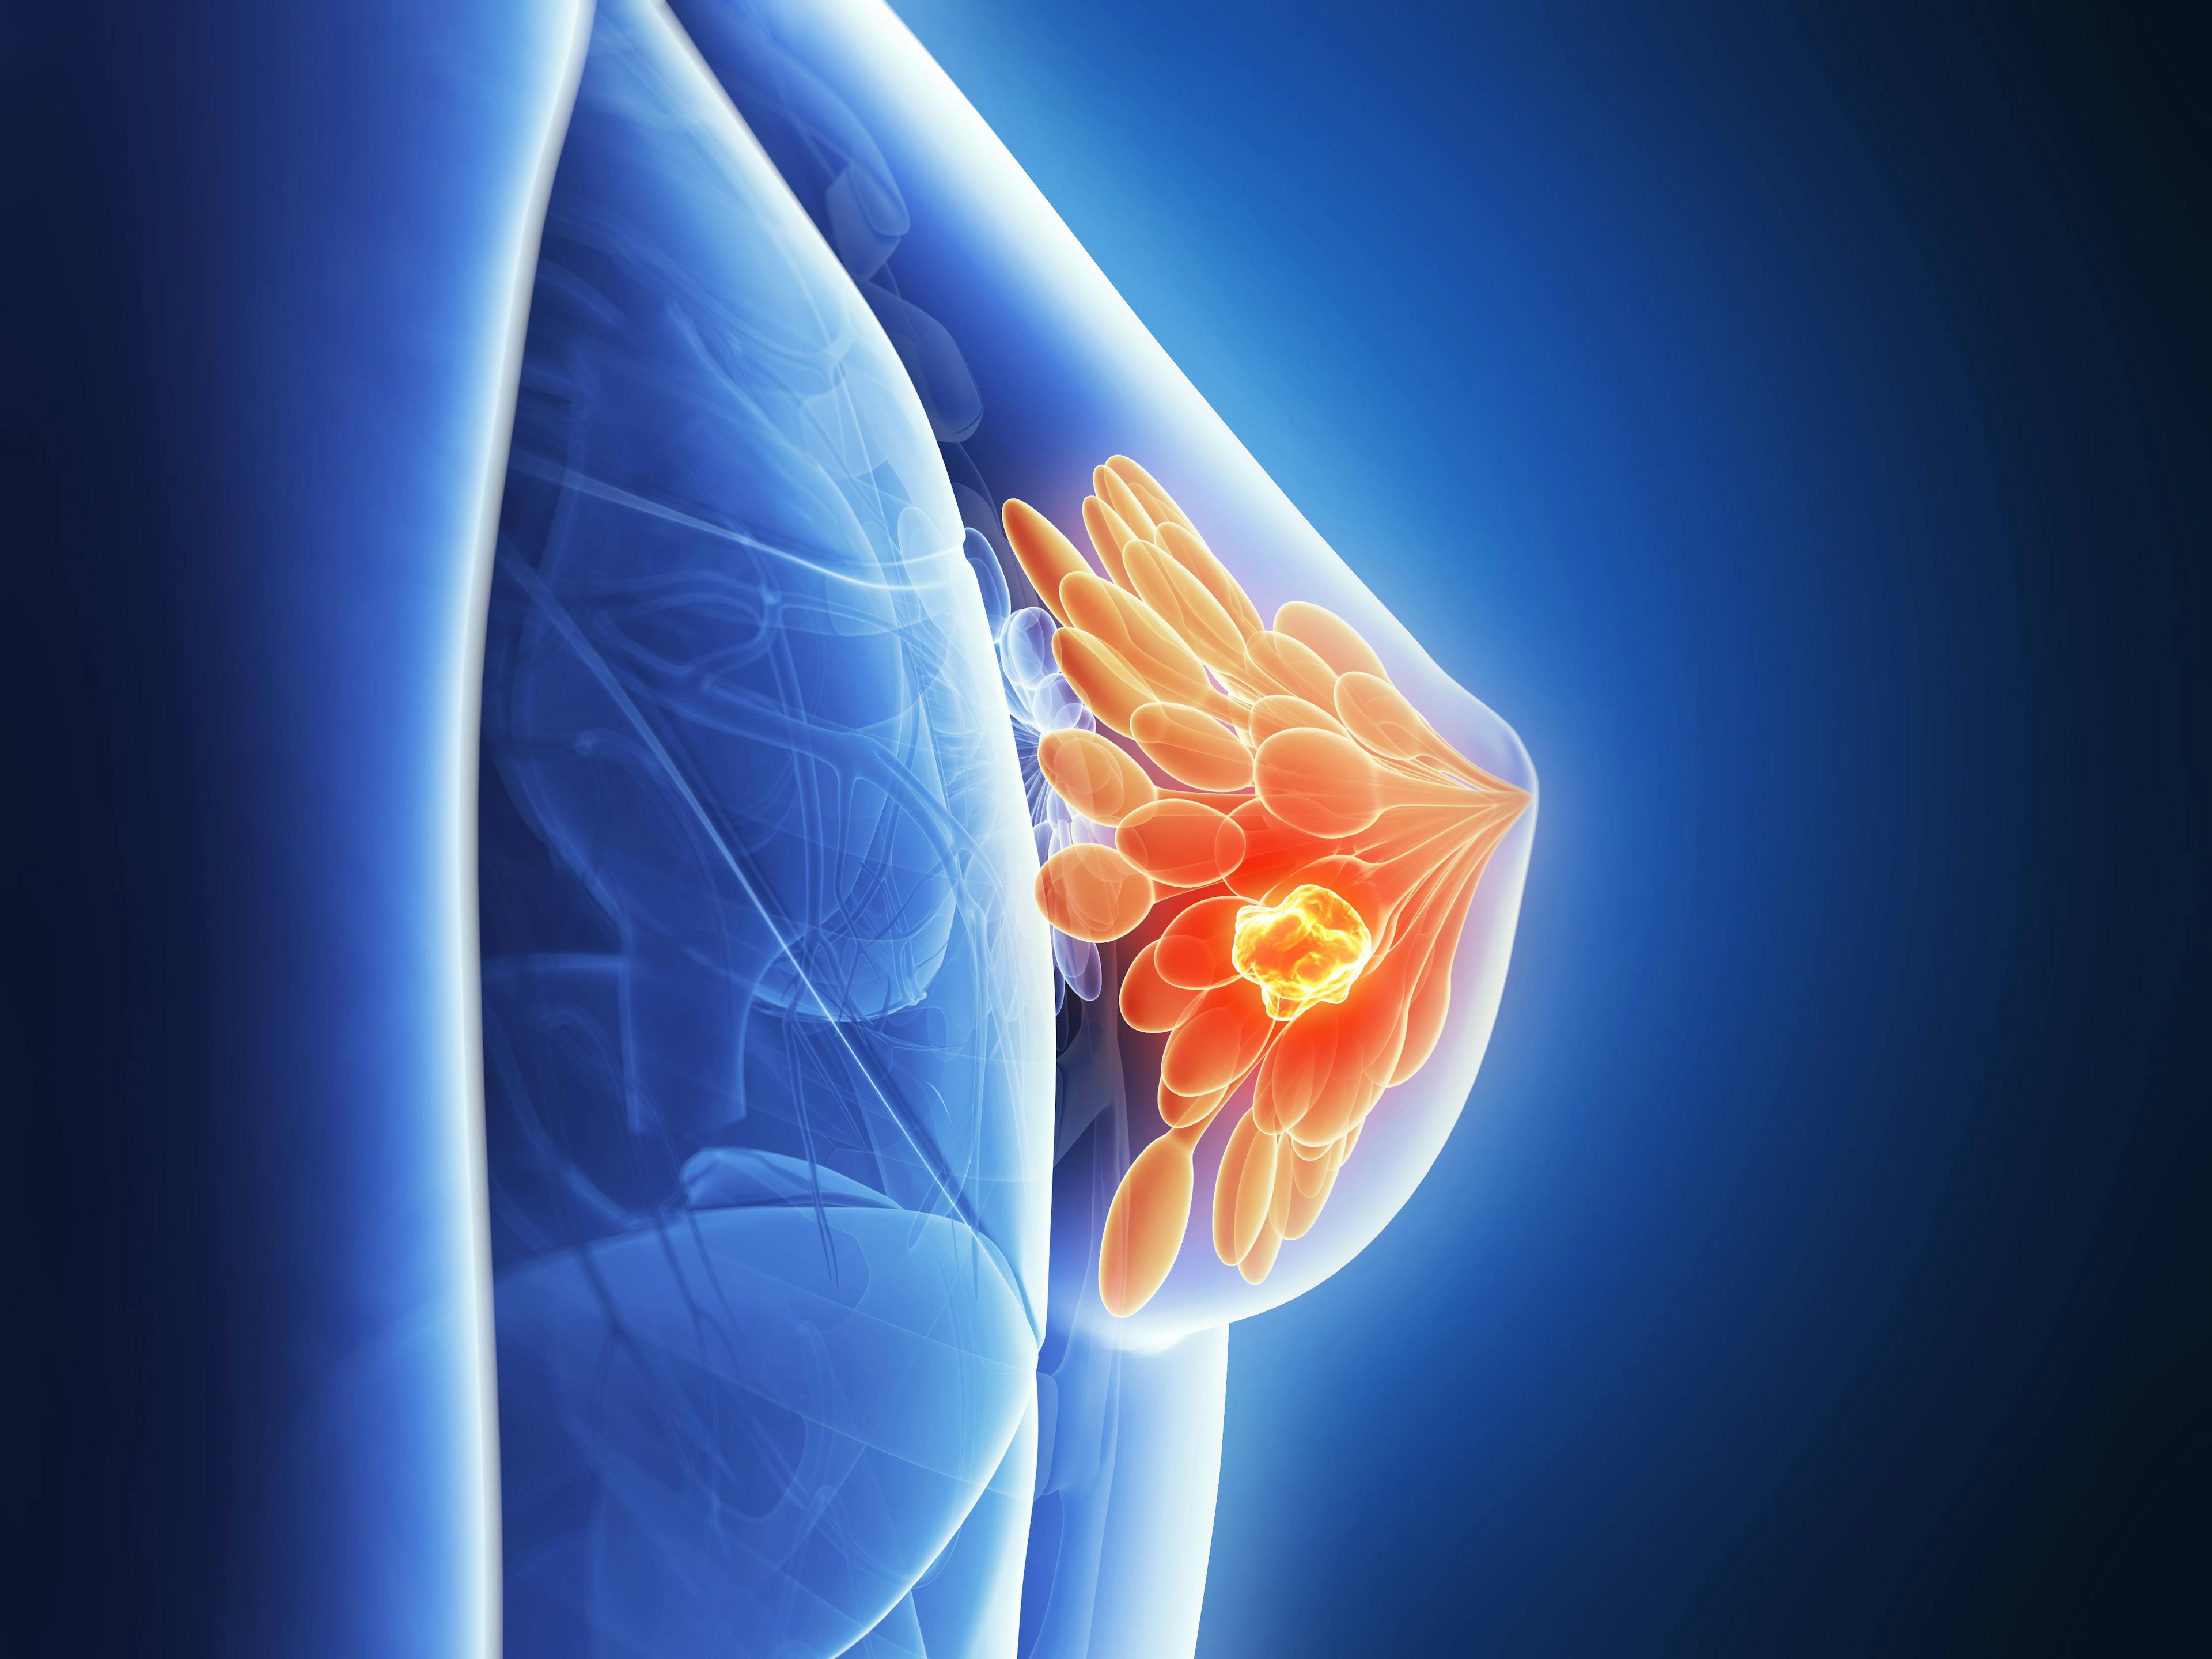 Trial to Determine Efficacy of Paclitaxel Combo in Breast Cancer Treatment